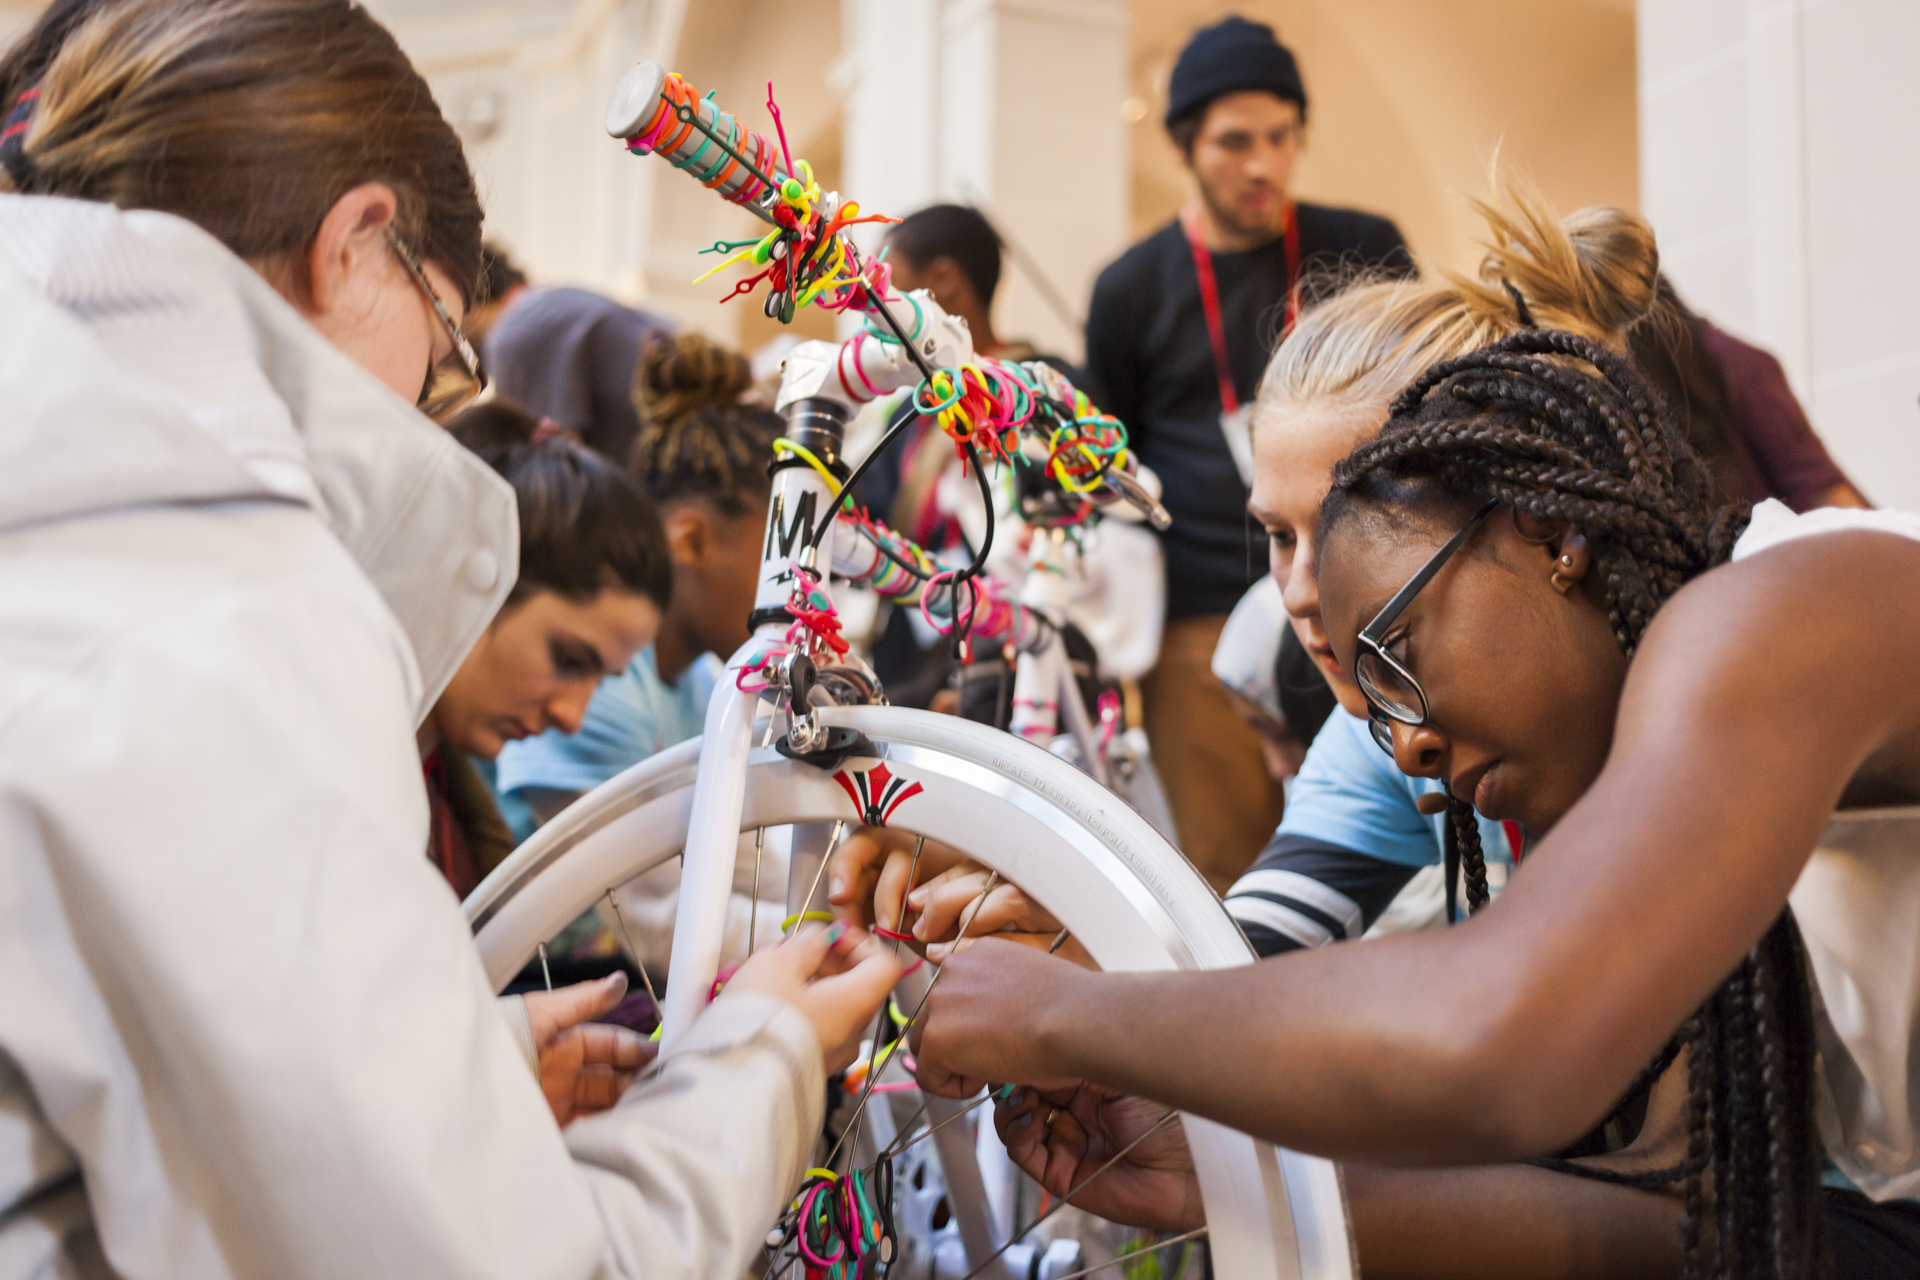 Attendees spiff up a bike with Hickies shoelaces. Photo: Dian Lofton/TED